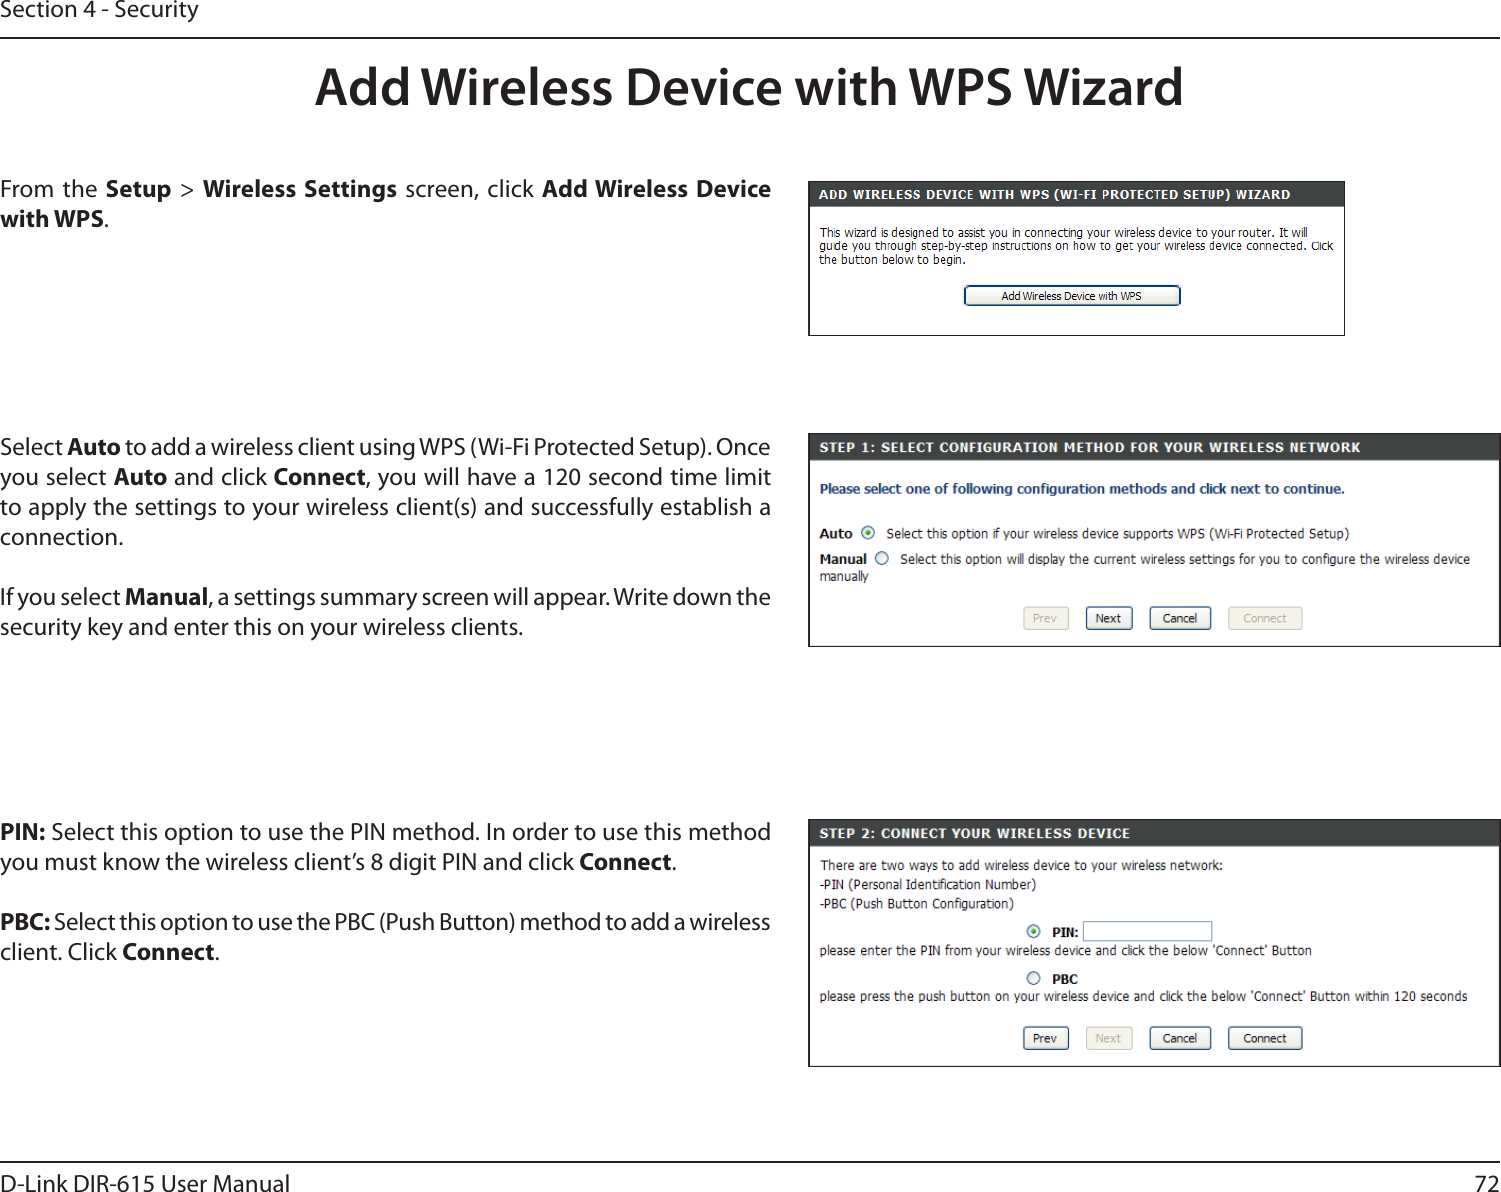 72D-Link DIR-615 User ManualSection 4 - SecurityFrom the Setup &gt; Wireless Settings  screen, click Add Wireless Device with WPS.Add Wireless Device with WPS WizardPIN: Select this option to use the PIN method. In order to use this method you must know the wireless client’s 8 digit PIN and click Connect.PBC: Select this option to use the PBC (Push Button) method to add a wireless client. Click Connect.Select Auto to add a wireless client using WPS (Wi-Fi Protected Setup). Once you select Auto and click Connect, you will have a 120 second time limit to apply the settings to your wireless client(s) and successfully establish a connection. If you select Manual, a settings summary screen will appear. Write down the security key and enter this on your wireless clients. 